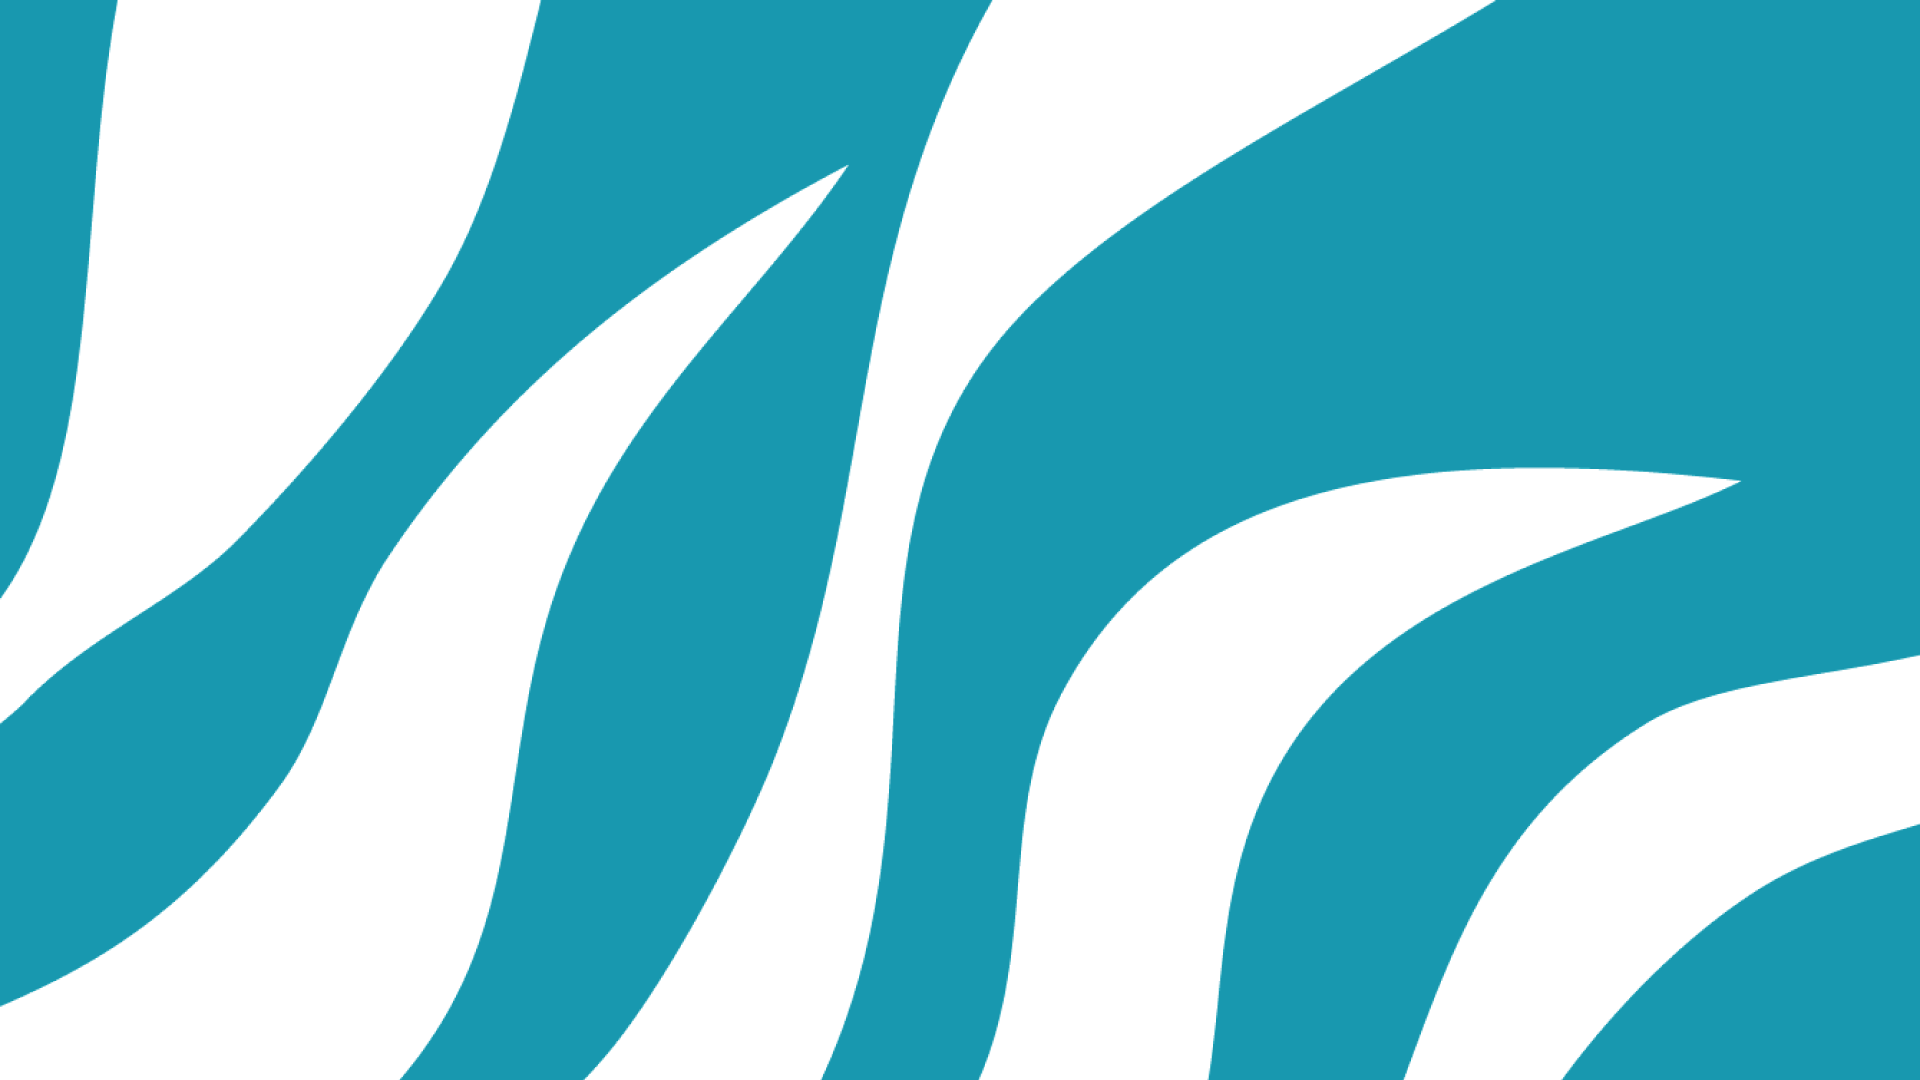 graphic waves with teal background